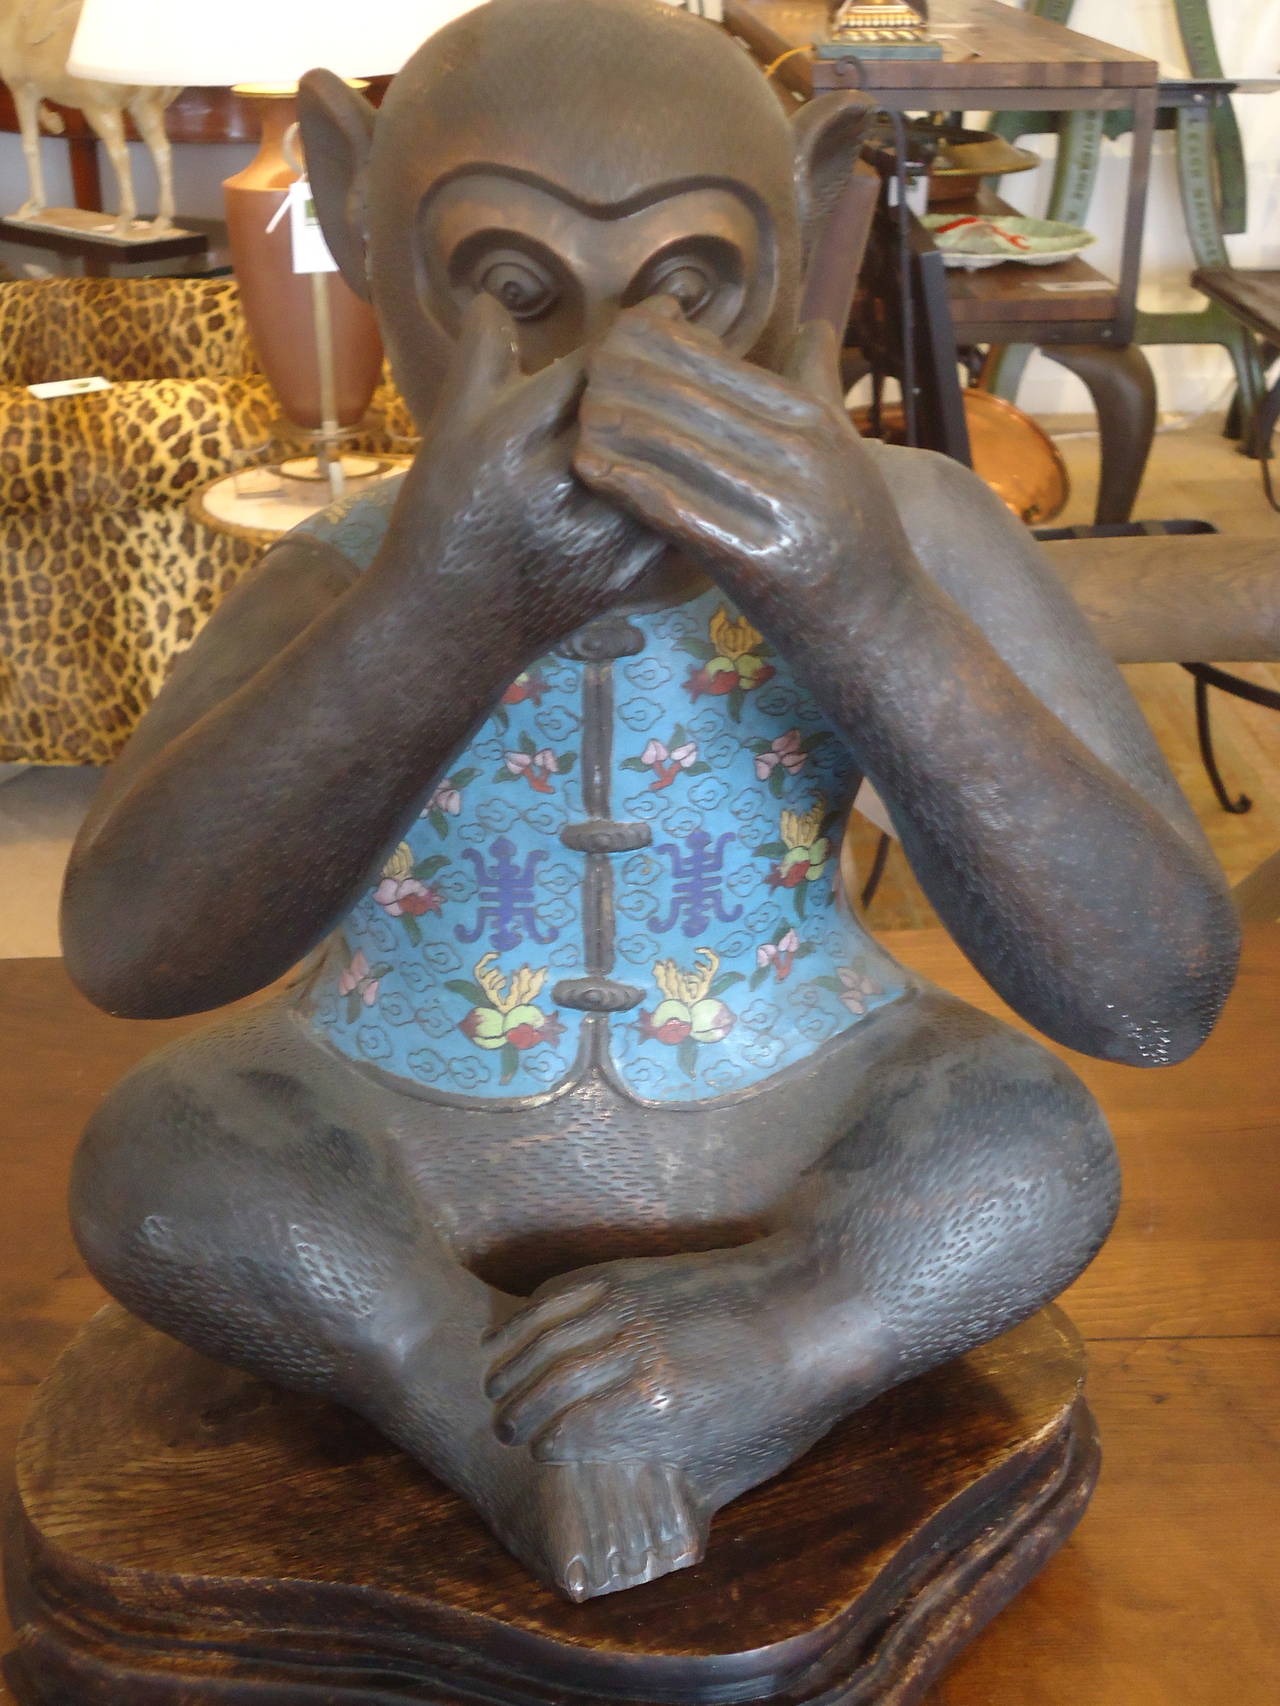 Wonderful trio of bronze monkeys adorned in colorful cloisonne jackets and sitting on vintage wooden bases. Each is gesturing and enacting the age old adage, see no evil, hear no evil, speak no evil.
Measure: Bases are 12 W x 12 D.